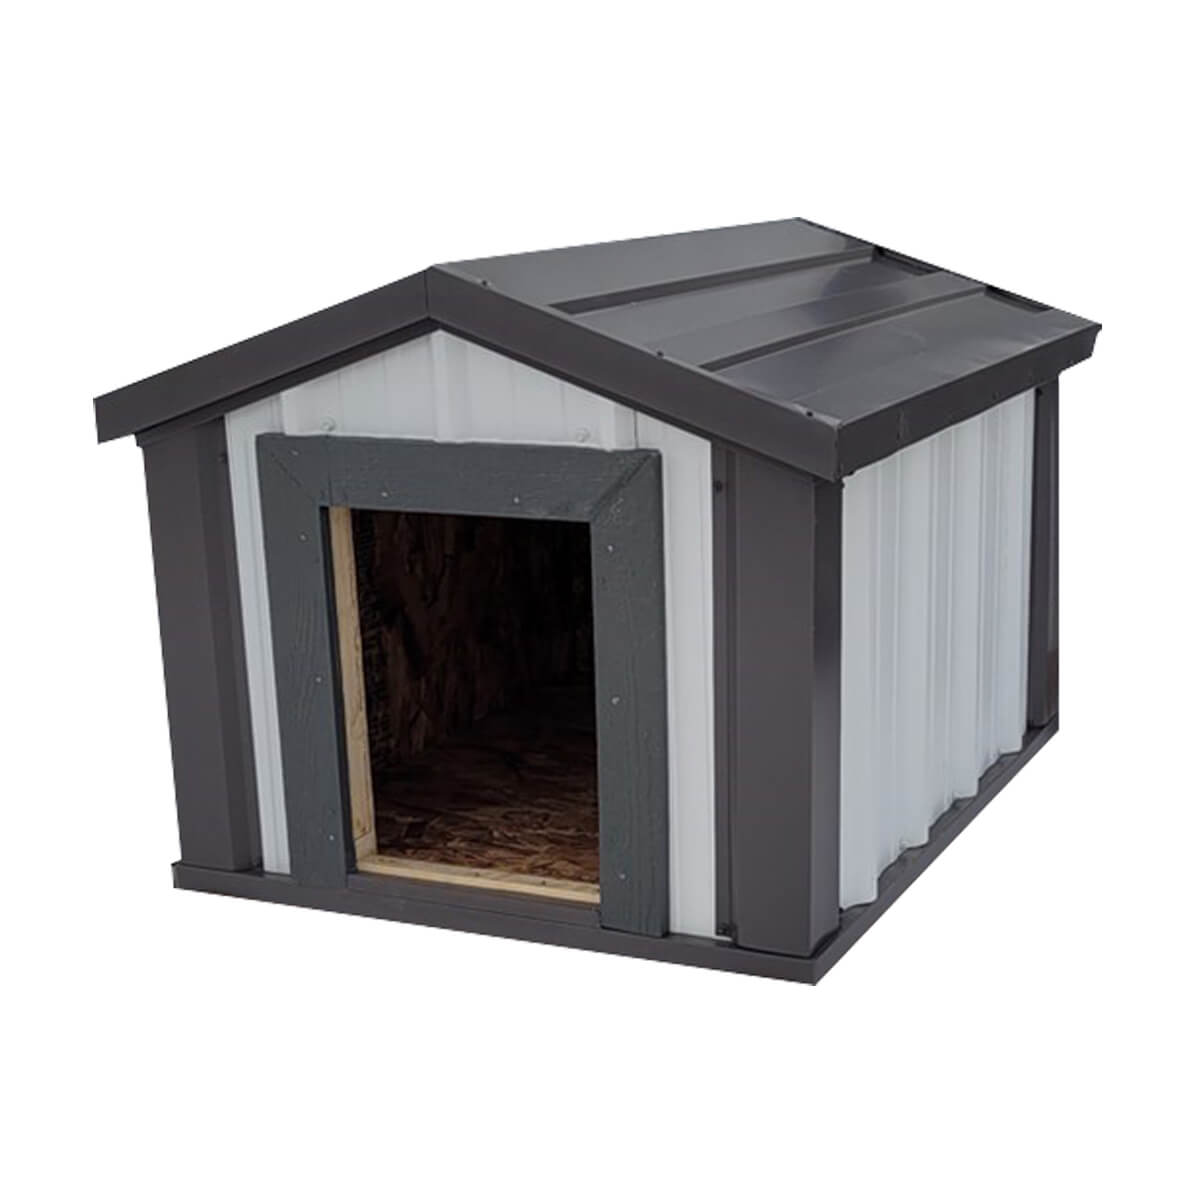 Insulated Metal Cladded Dog House - 3-ft x 4-ft